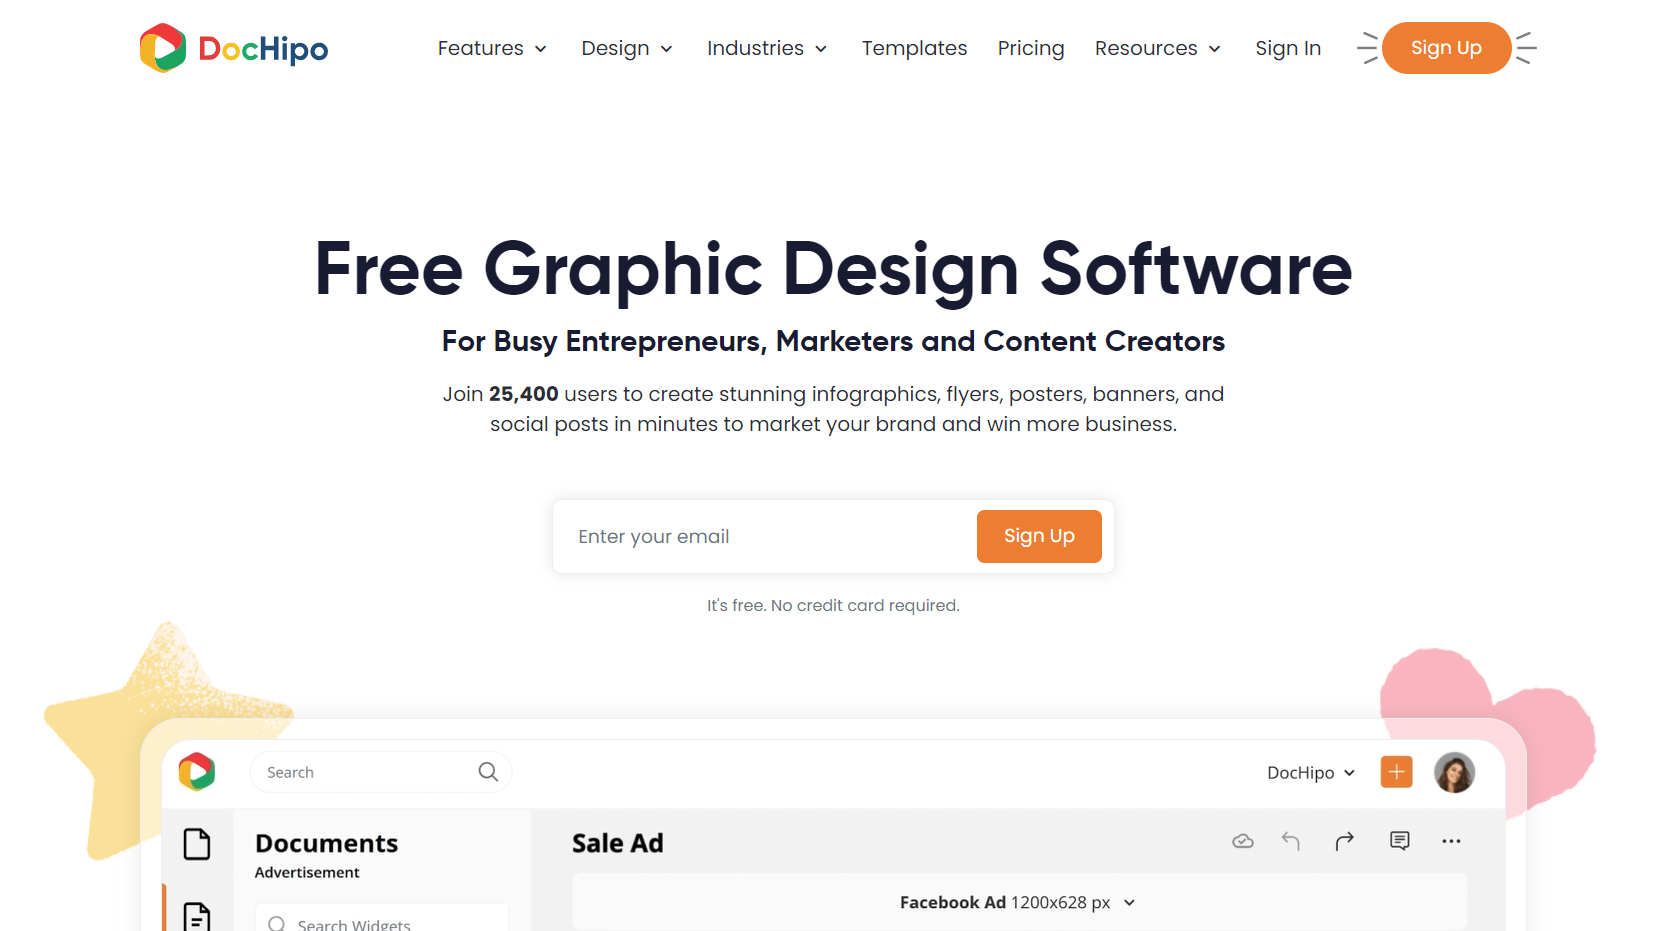 10 Must-Have Free Graphic Design Tools for Entrepreneurs